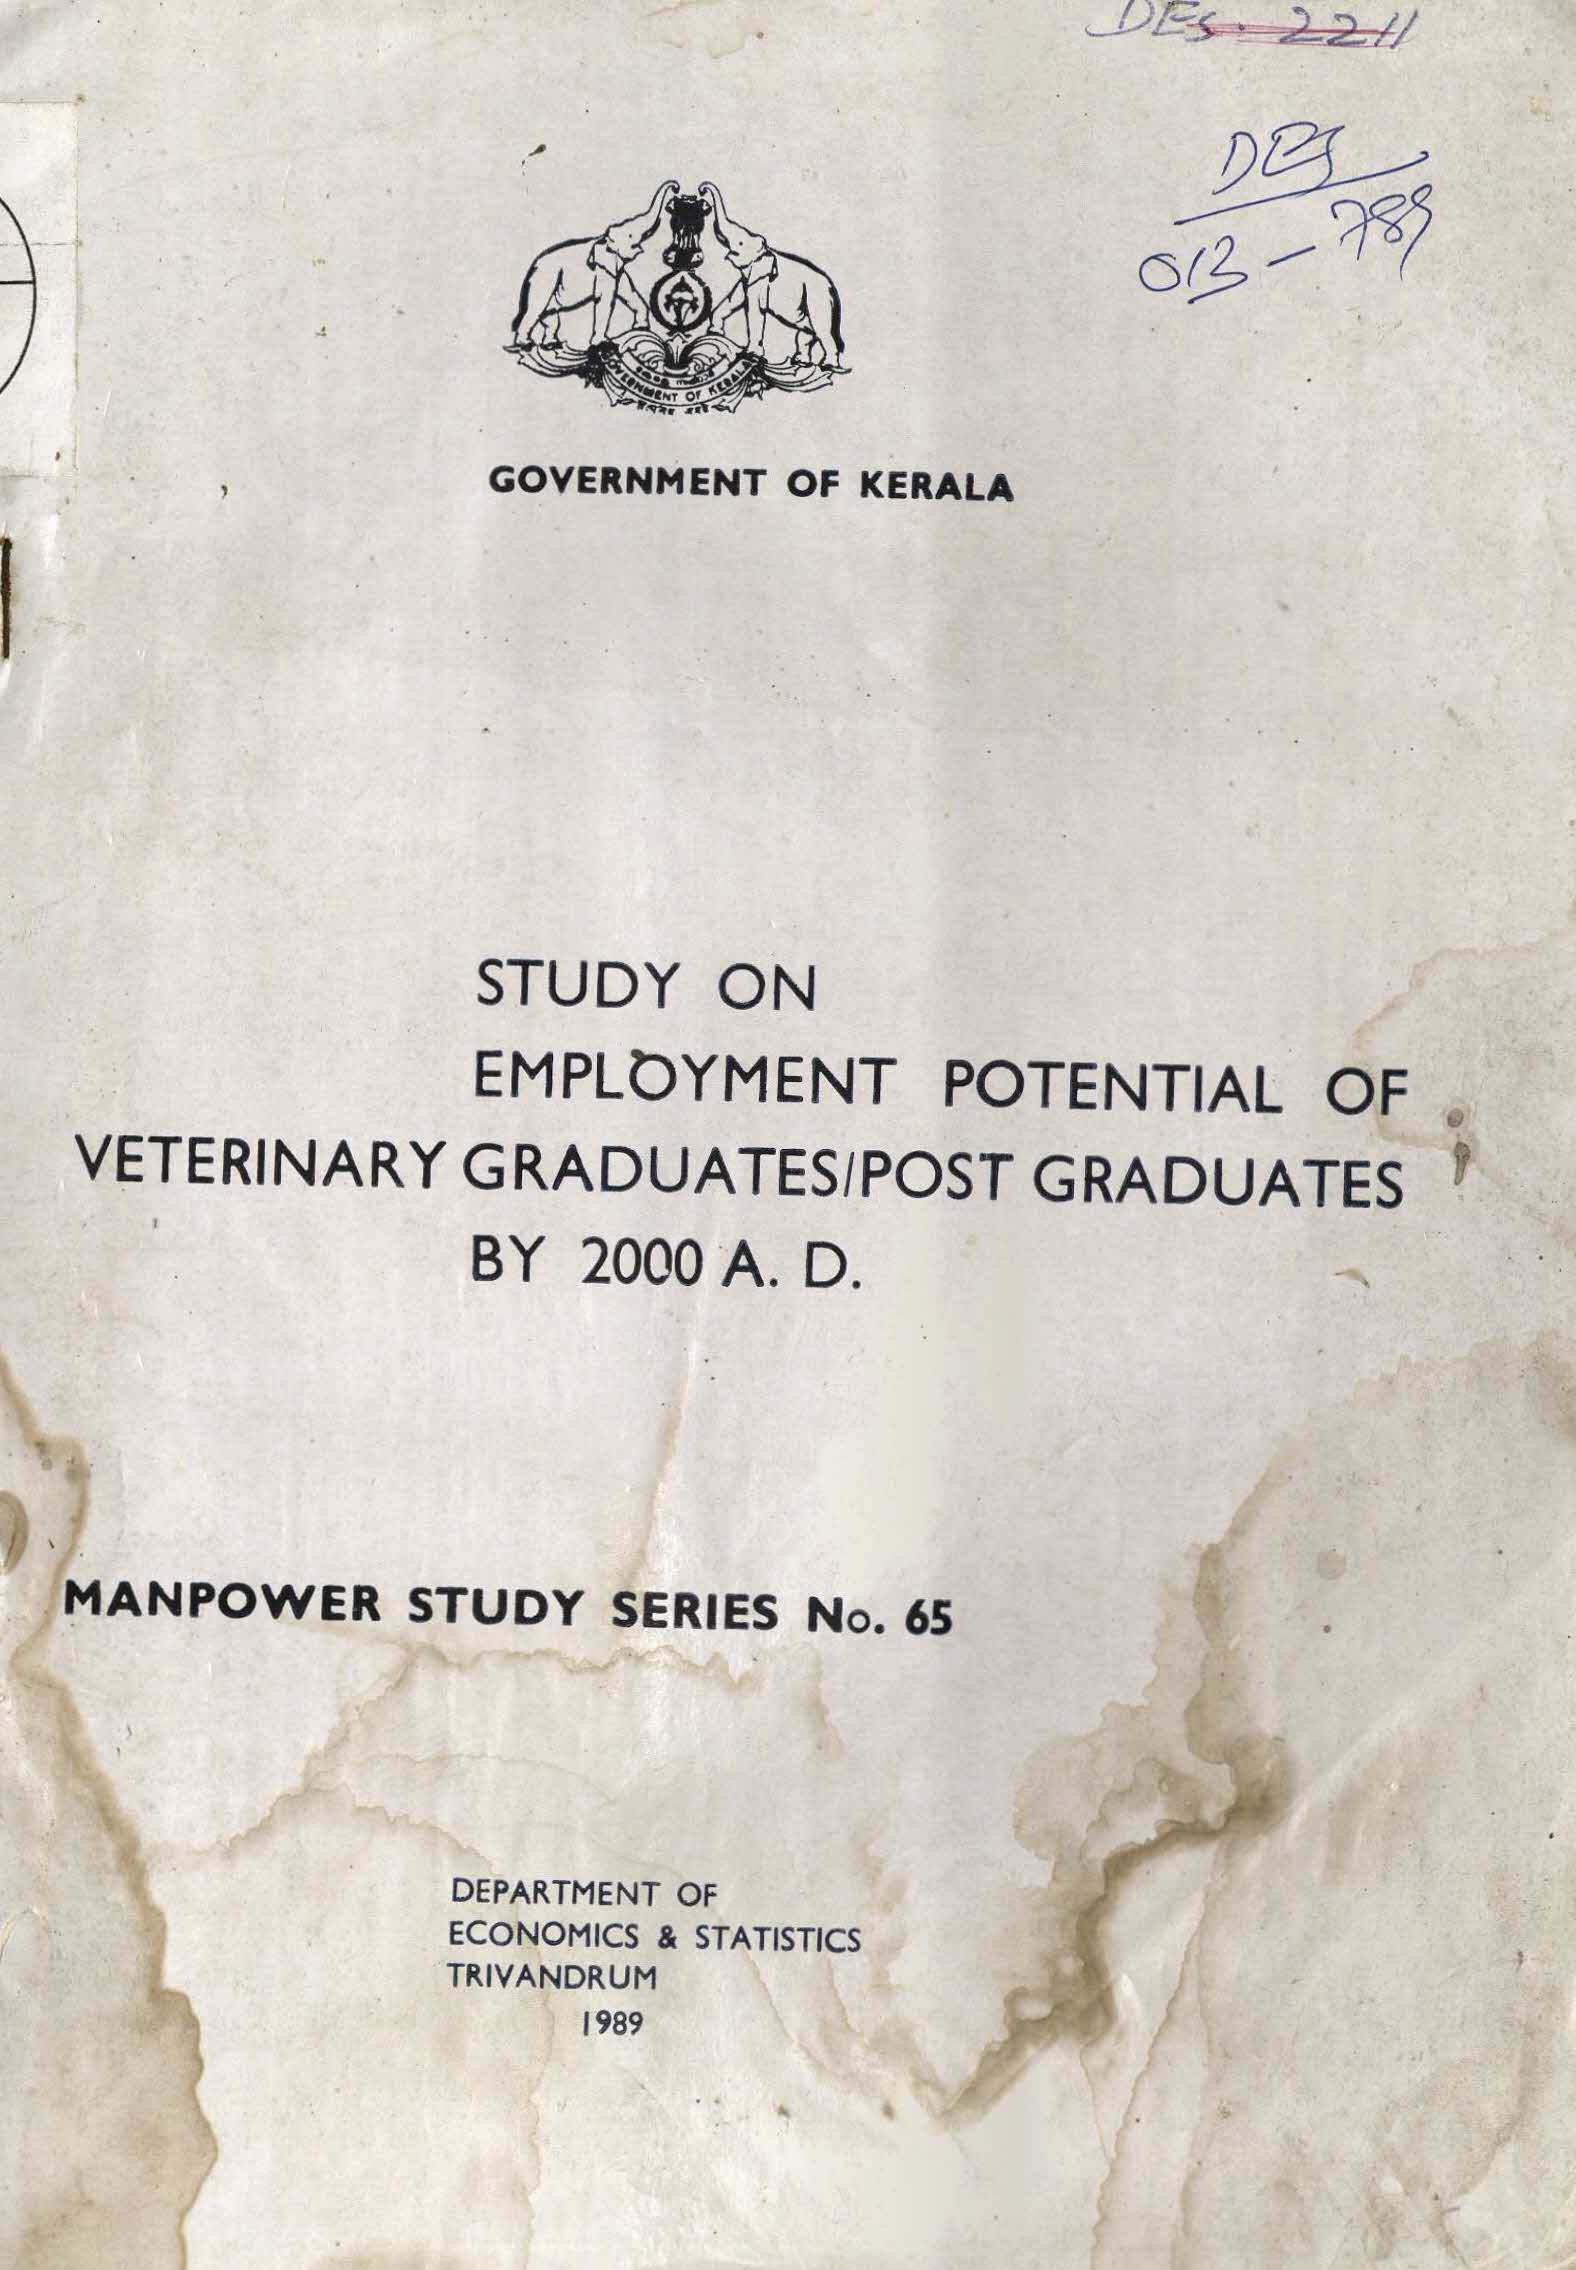 STUDY ON EMPLOYMENT POTENTIAL OF VETERINARY GRADUATES POST GRADUATES BY 2000 AD